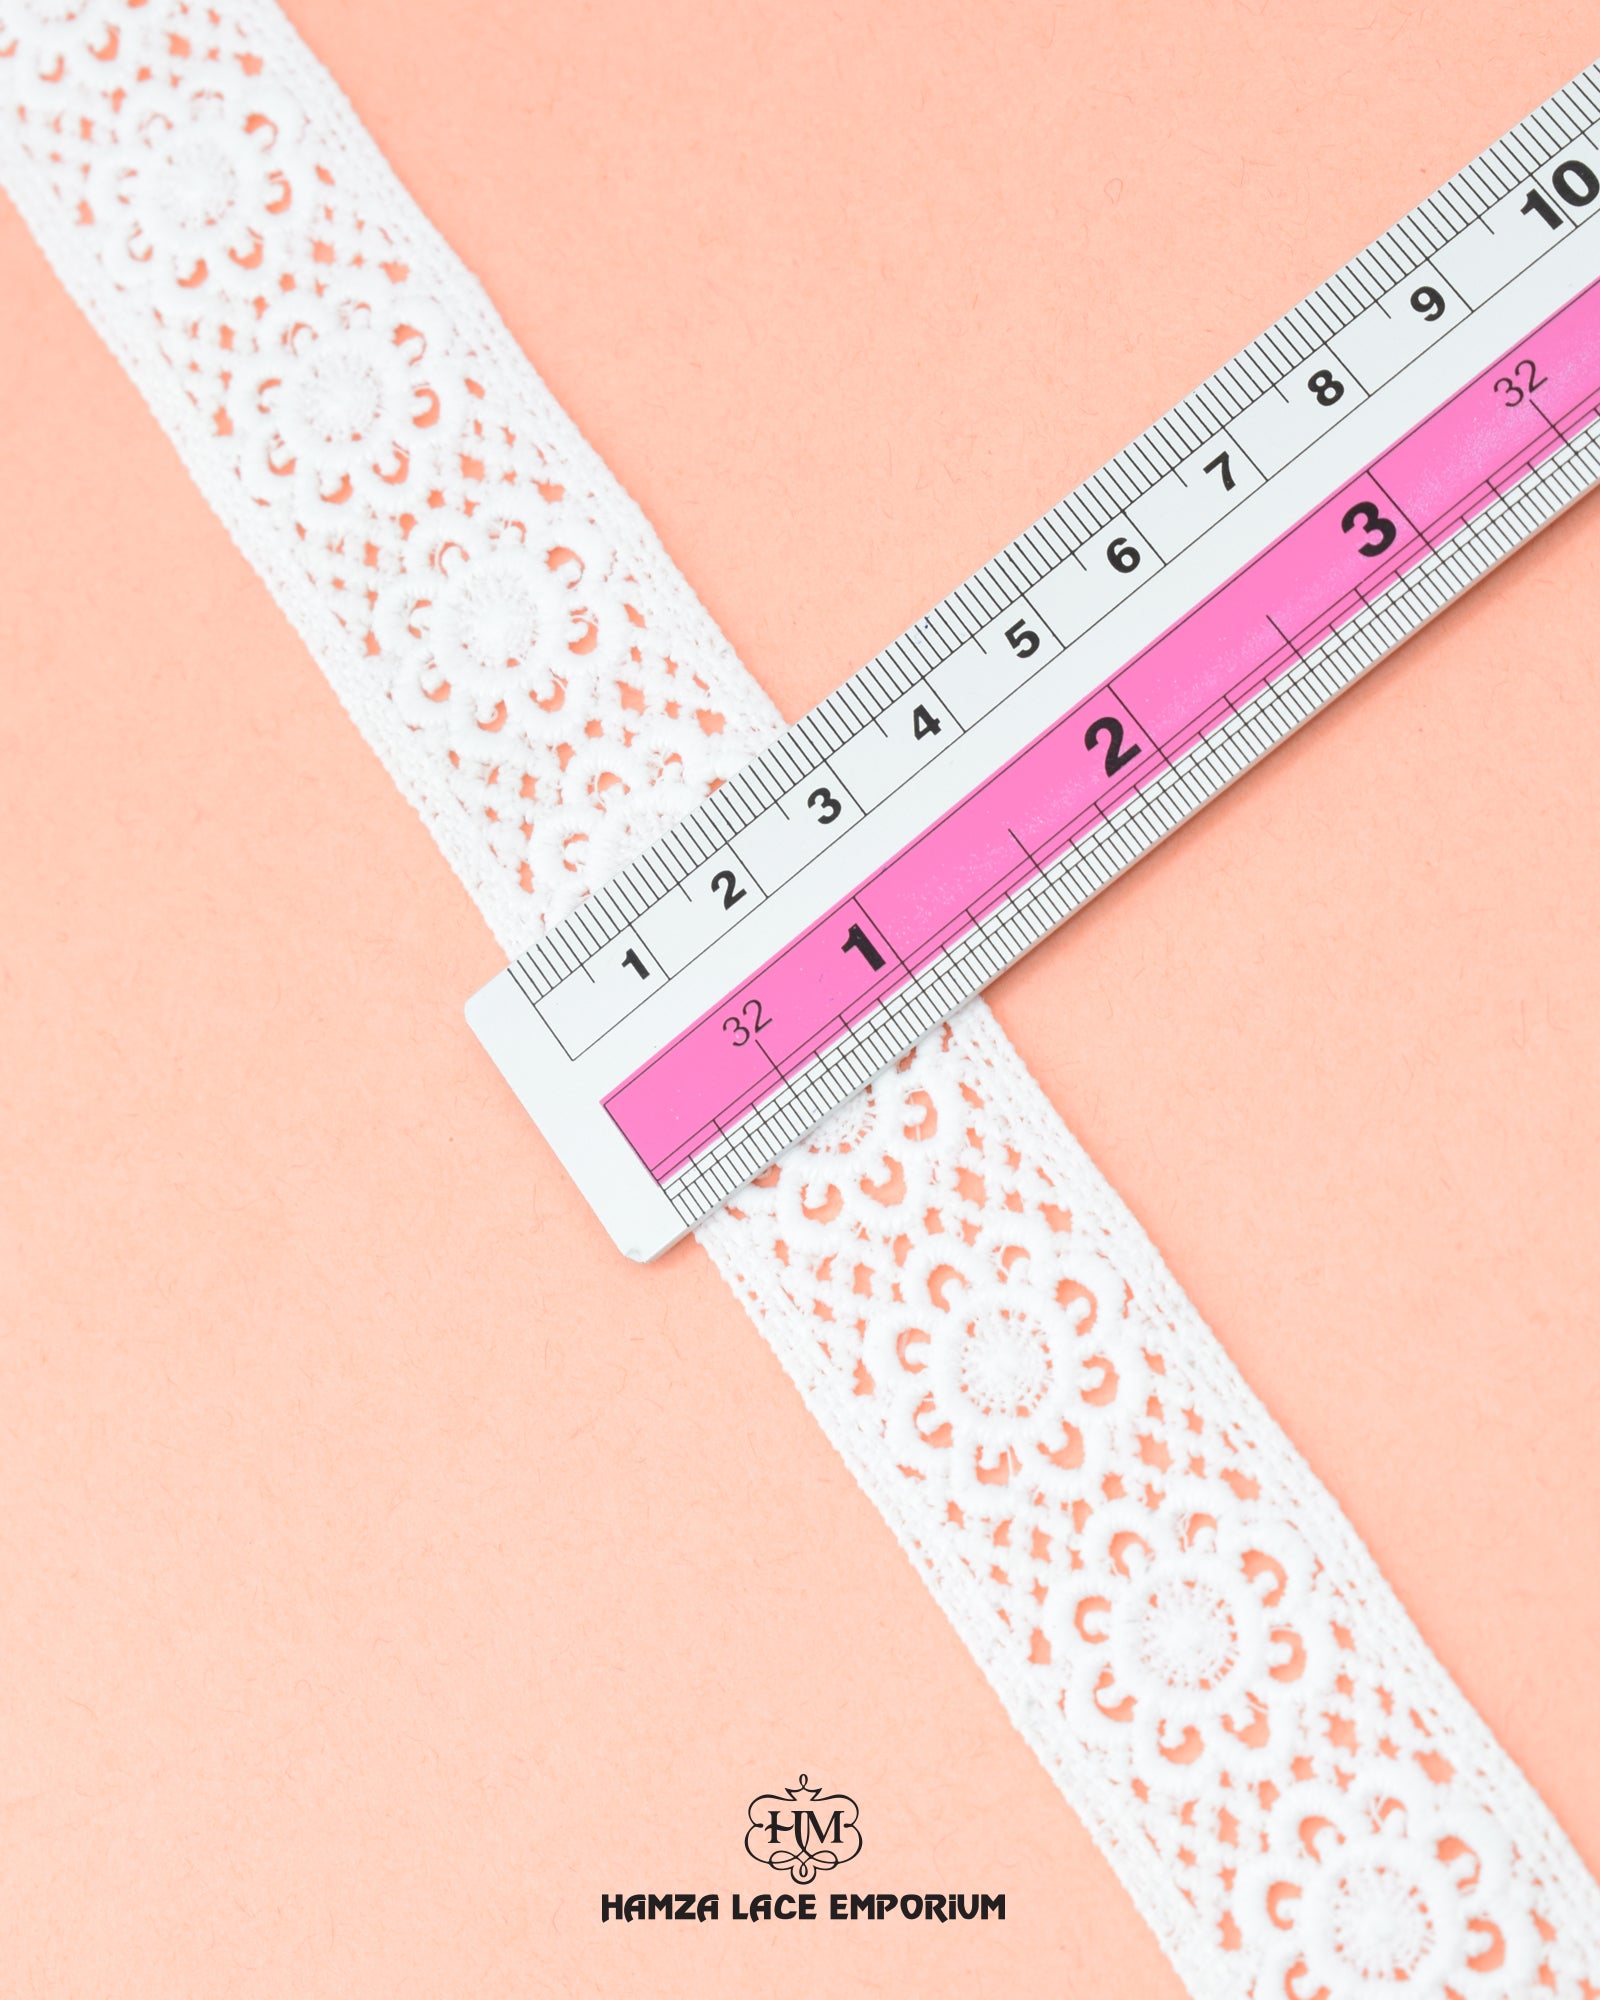 The size of the 'Center Flower Lace 23201' is given with the help of a ruler.